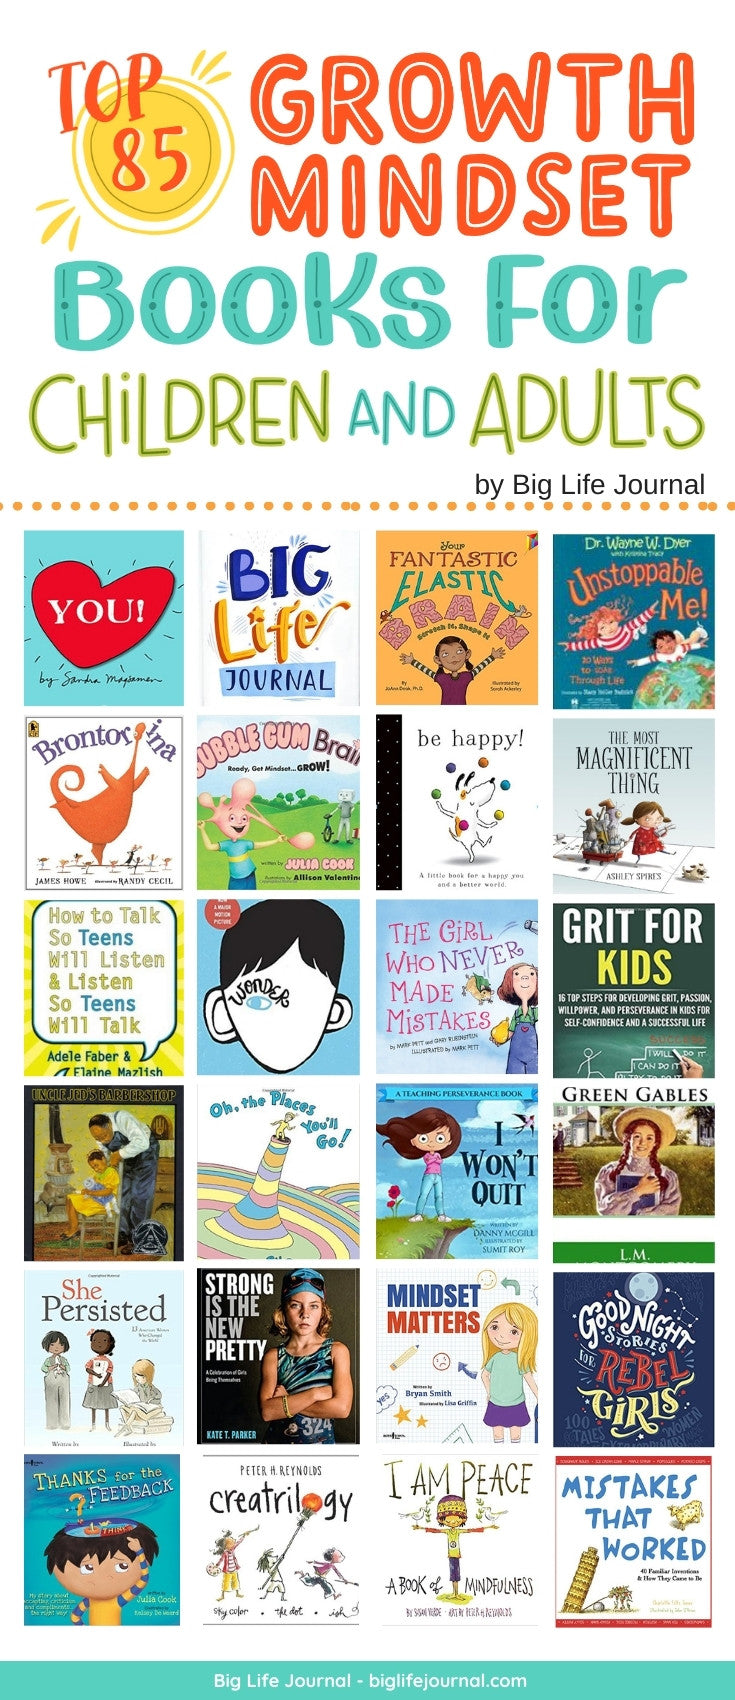 Top 85 Growth Mindset Books for Kids & Adults